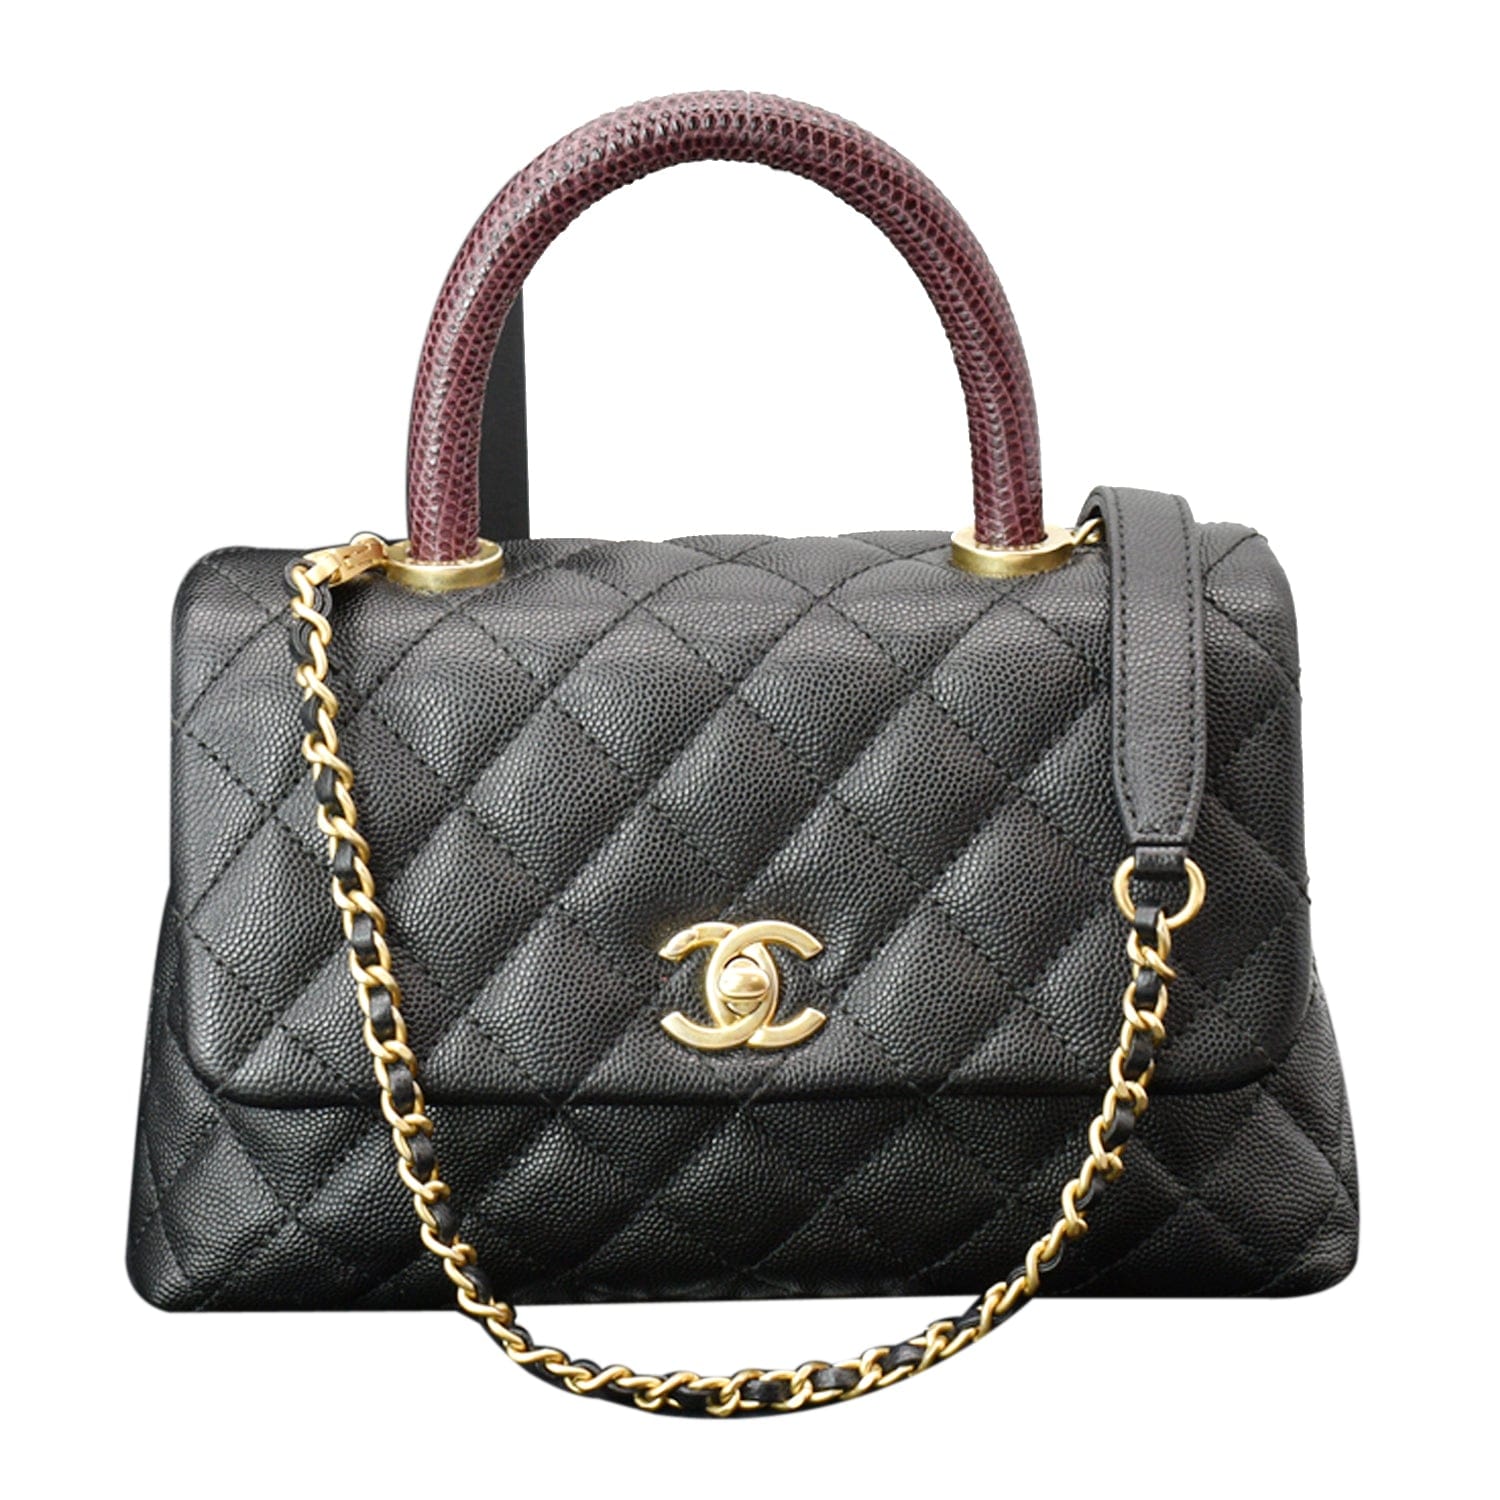 creative Exclude Turn down chanel 255 bag price euro versus etiquette  nothing